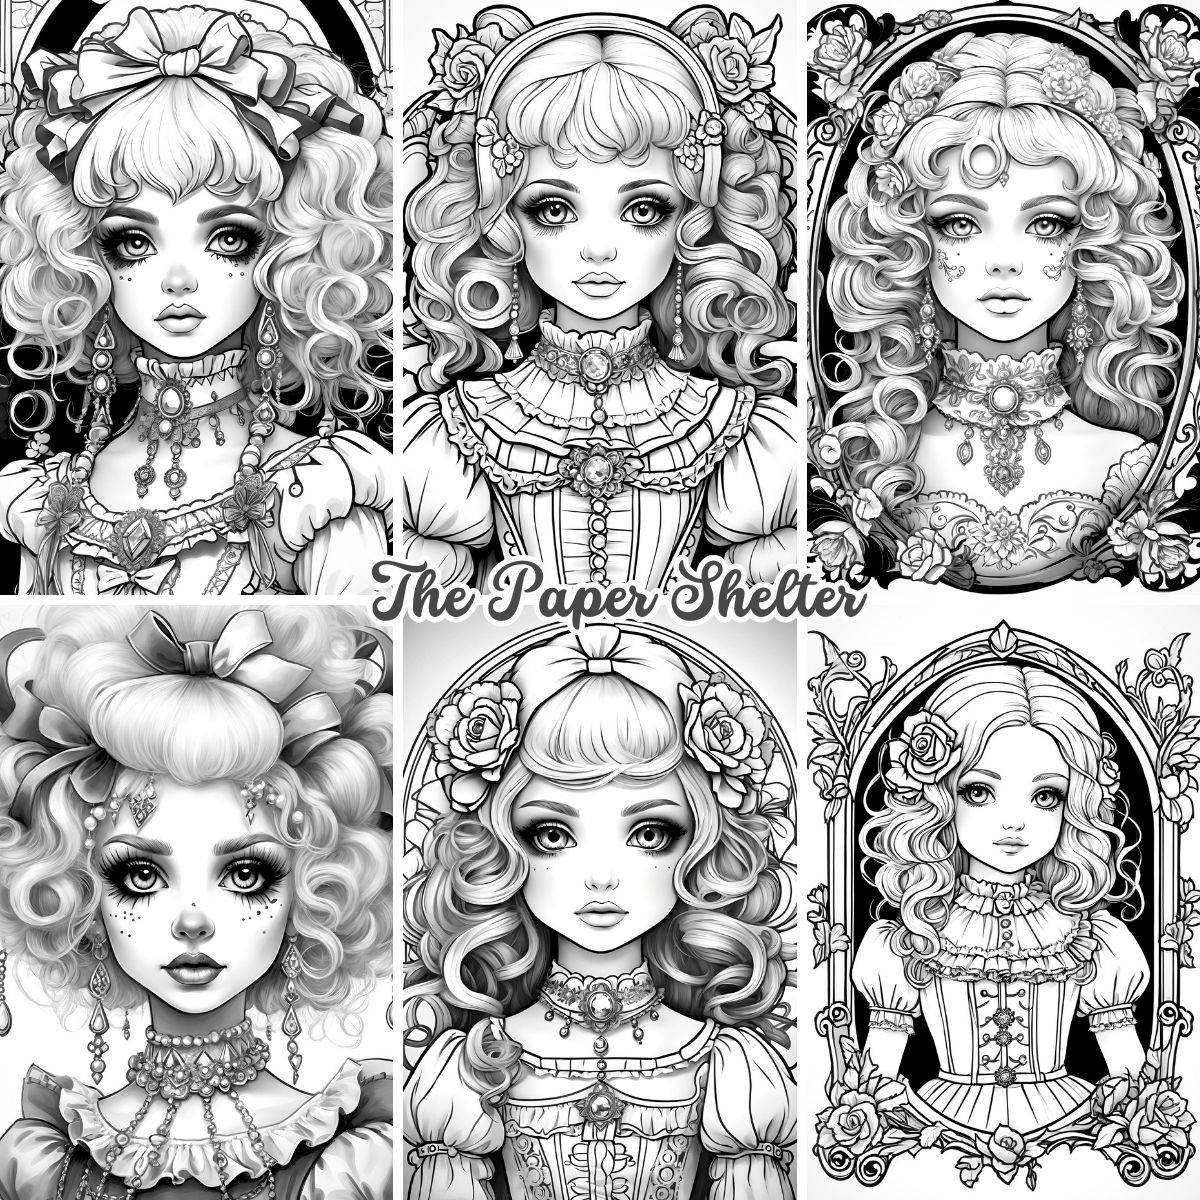 Victorian Gothic Dolls - Digital Coloring Book - Click Image to Close